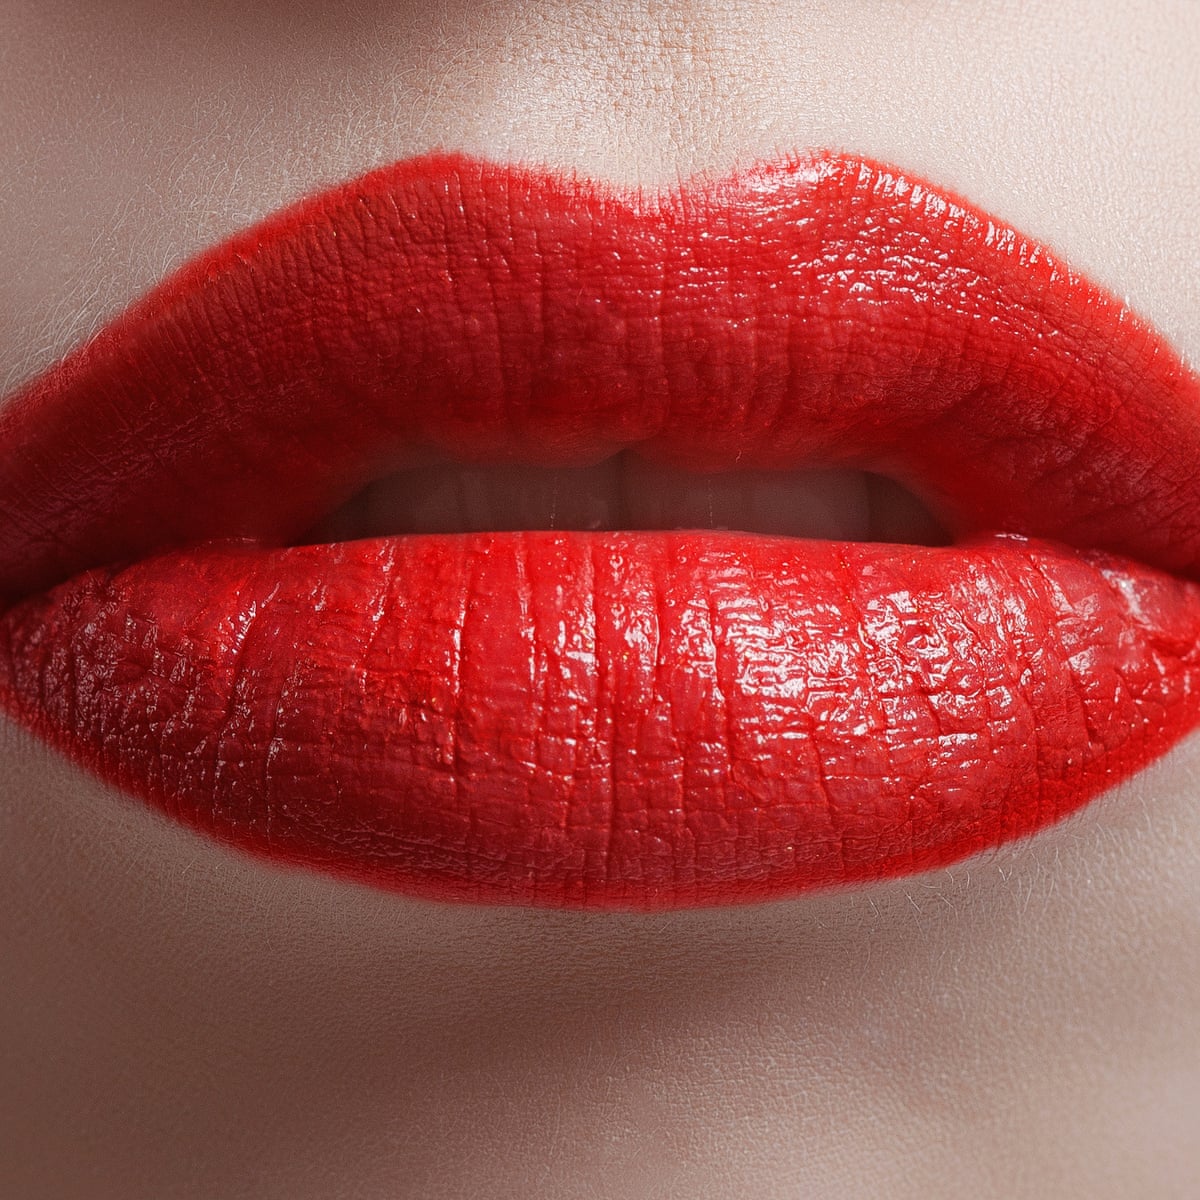 Can thin lips wear red lipstick